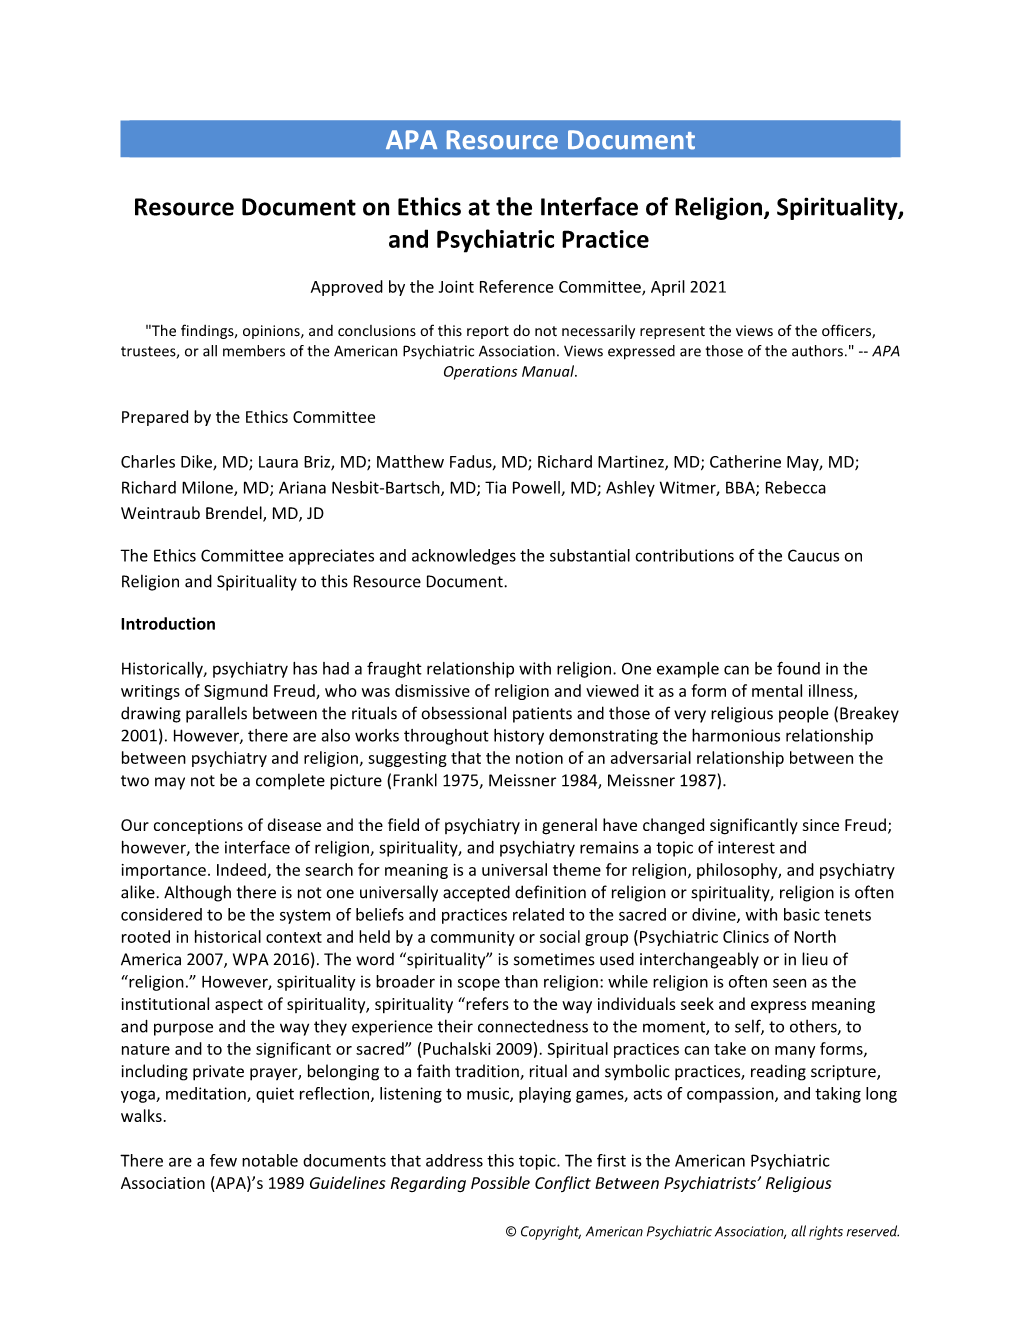 Resource Document on Ethics at the Interface of Religion, Spirituality, and Psychiatric Practice